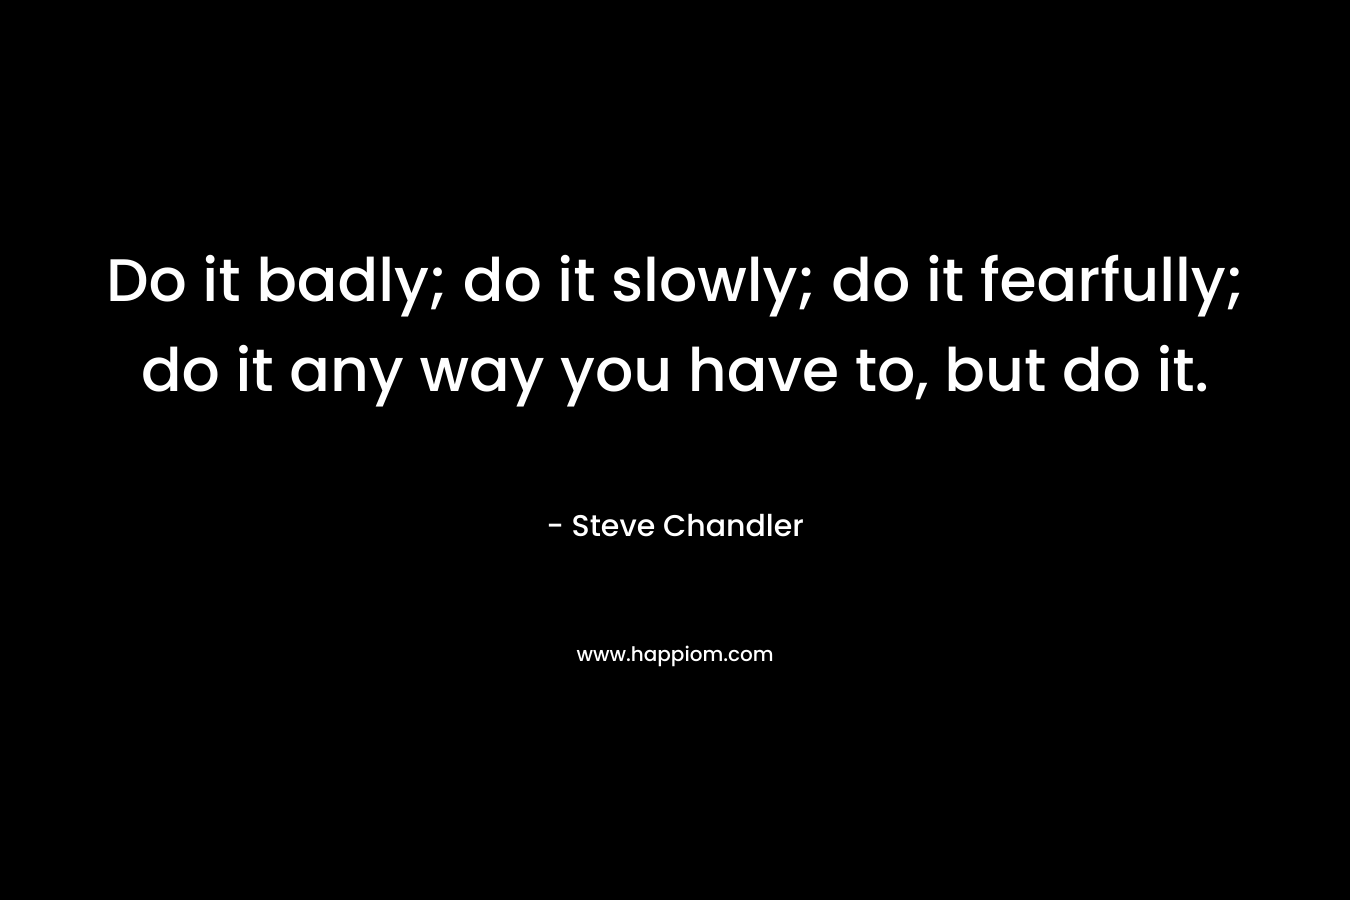 Do it badly; do it slowly; do it fearfully; do it any way you have to, but do it.